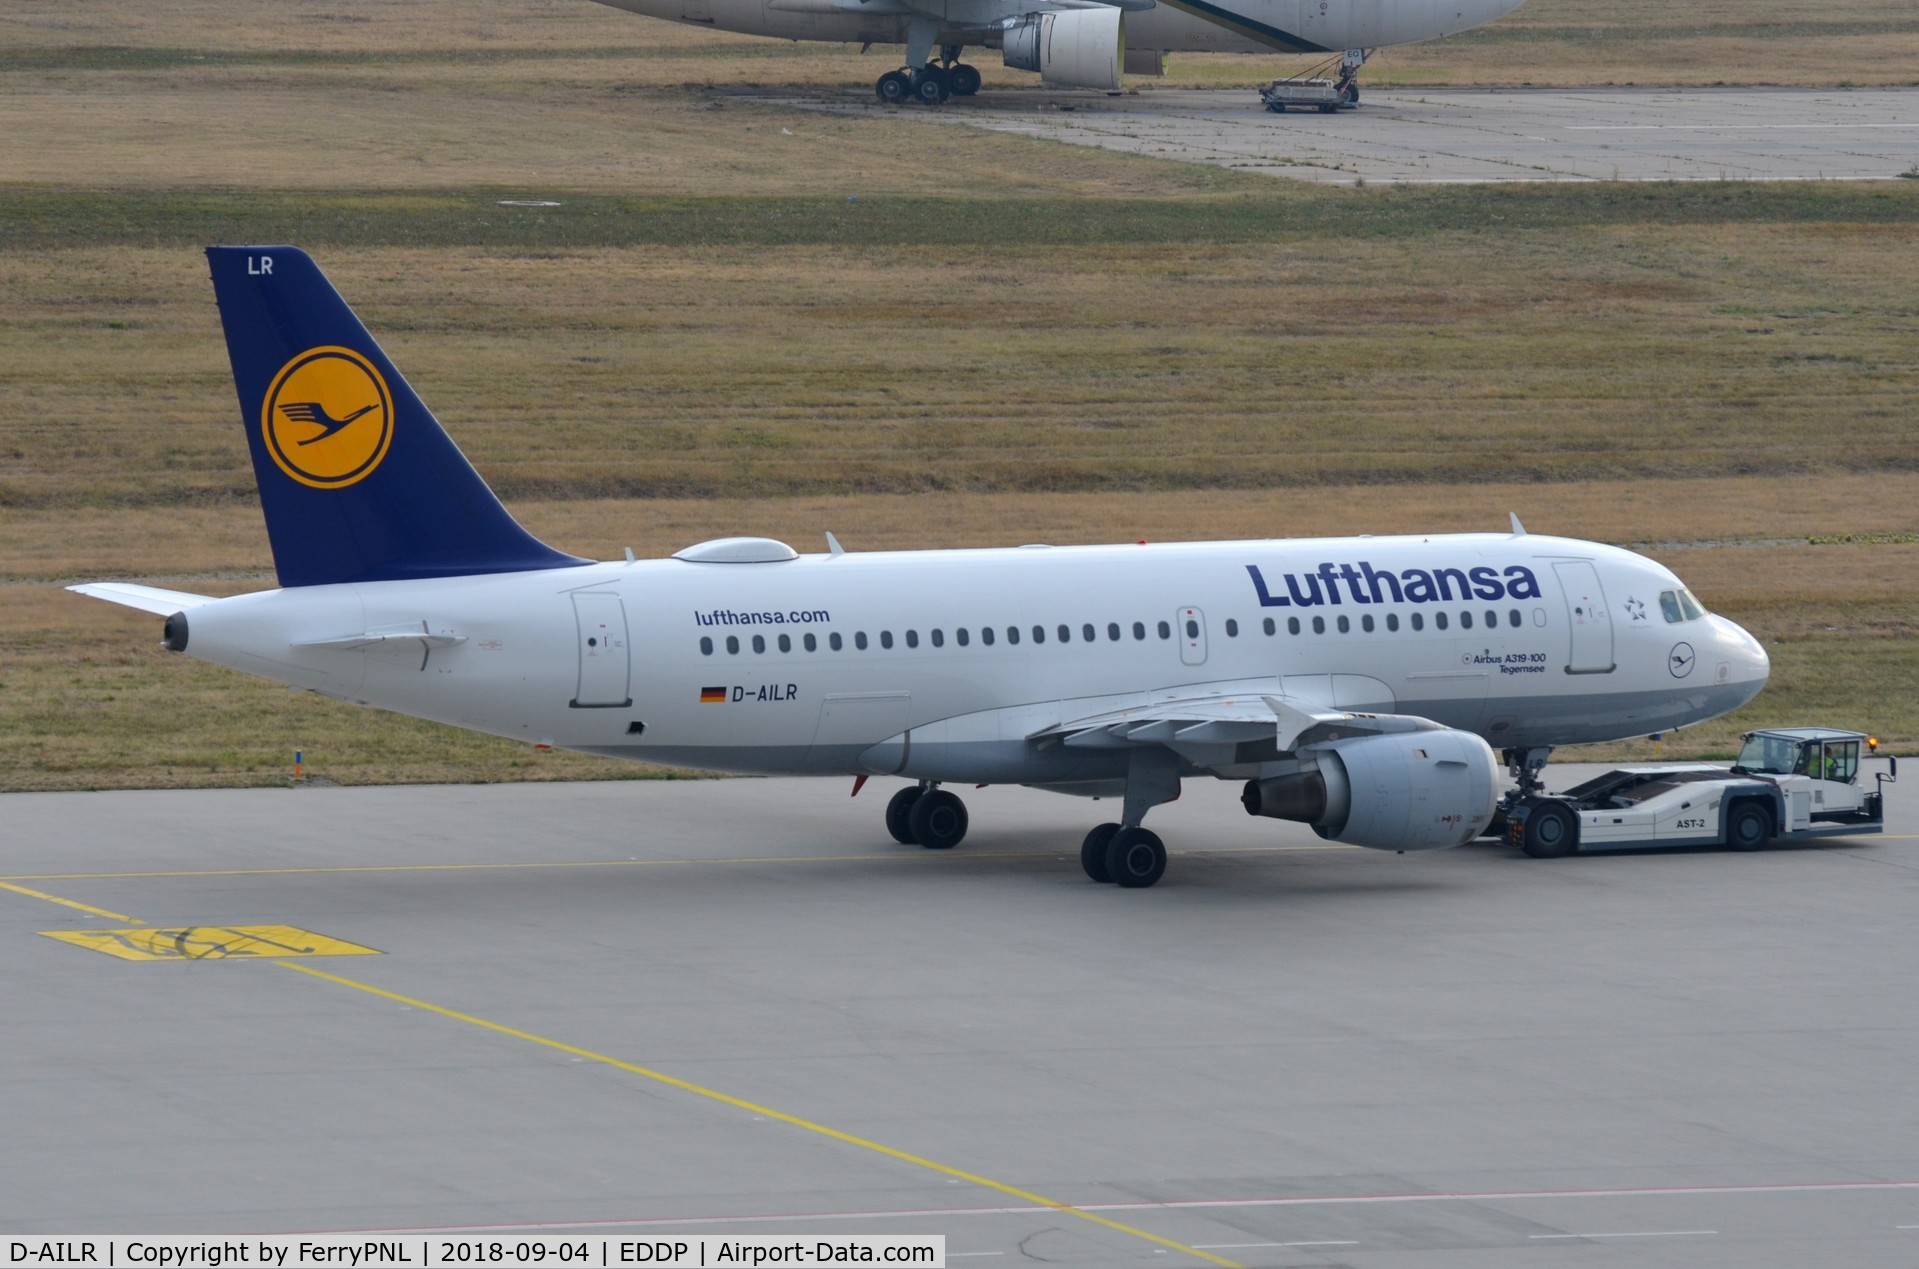 D-AILR, 1997 Airbus A319-114 C/N 723, Lufthansa A319 pushed-back for its half an hour flight.